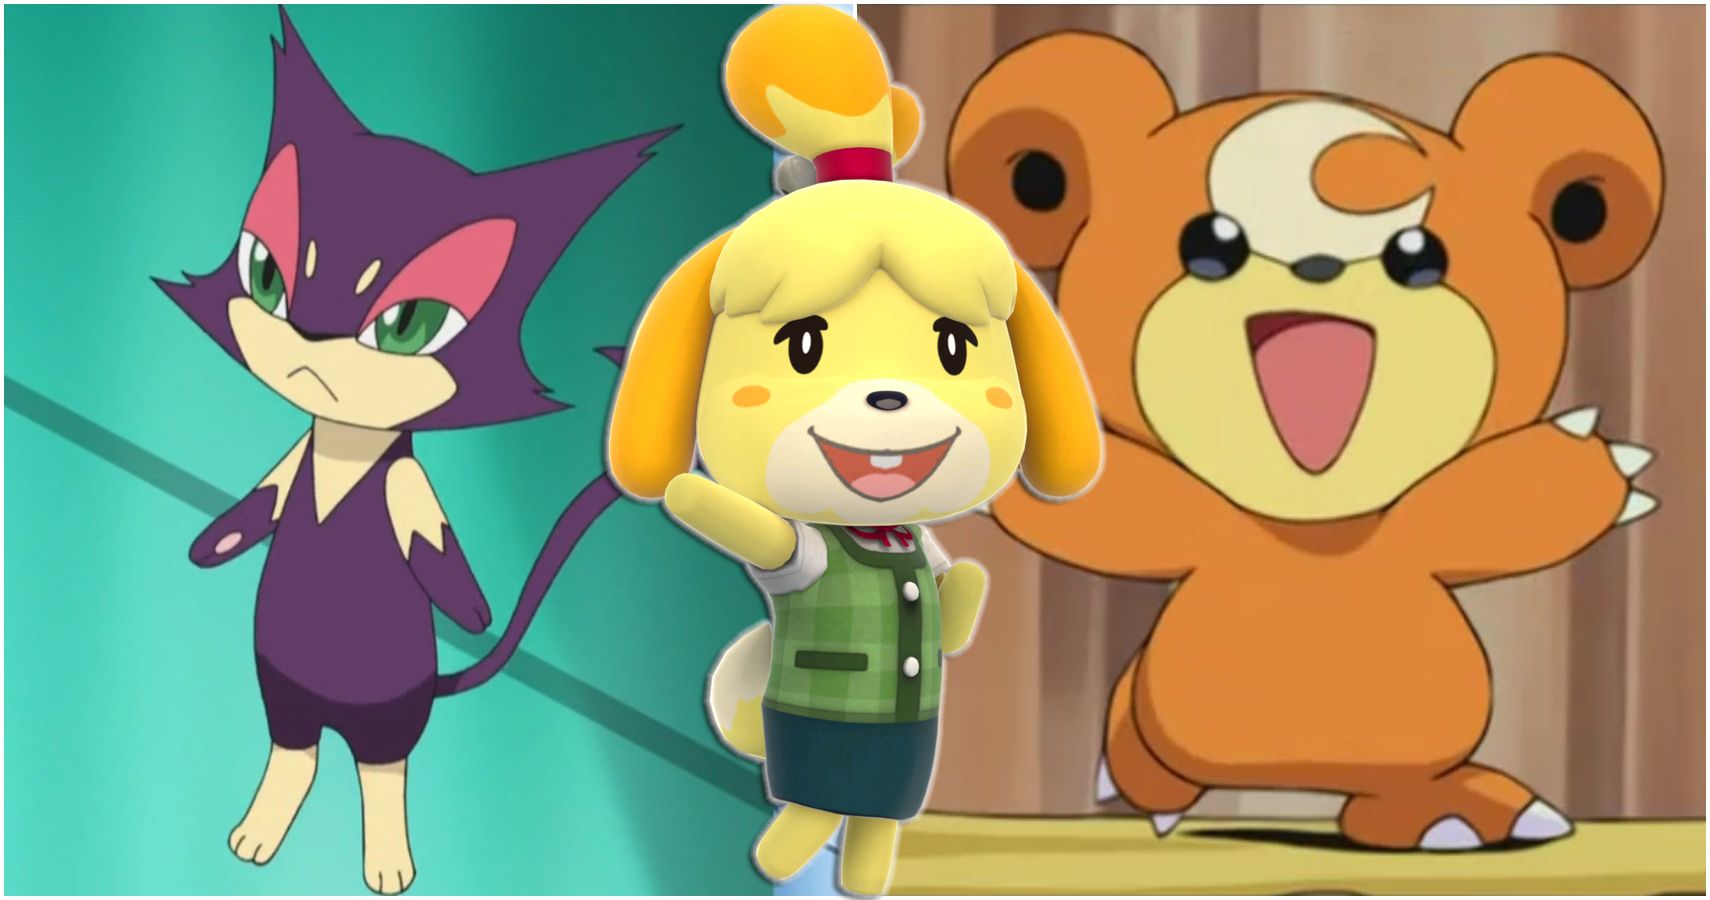 Animal Crossing: 10 Pokémon That Would Make Great Villagers